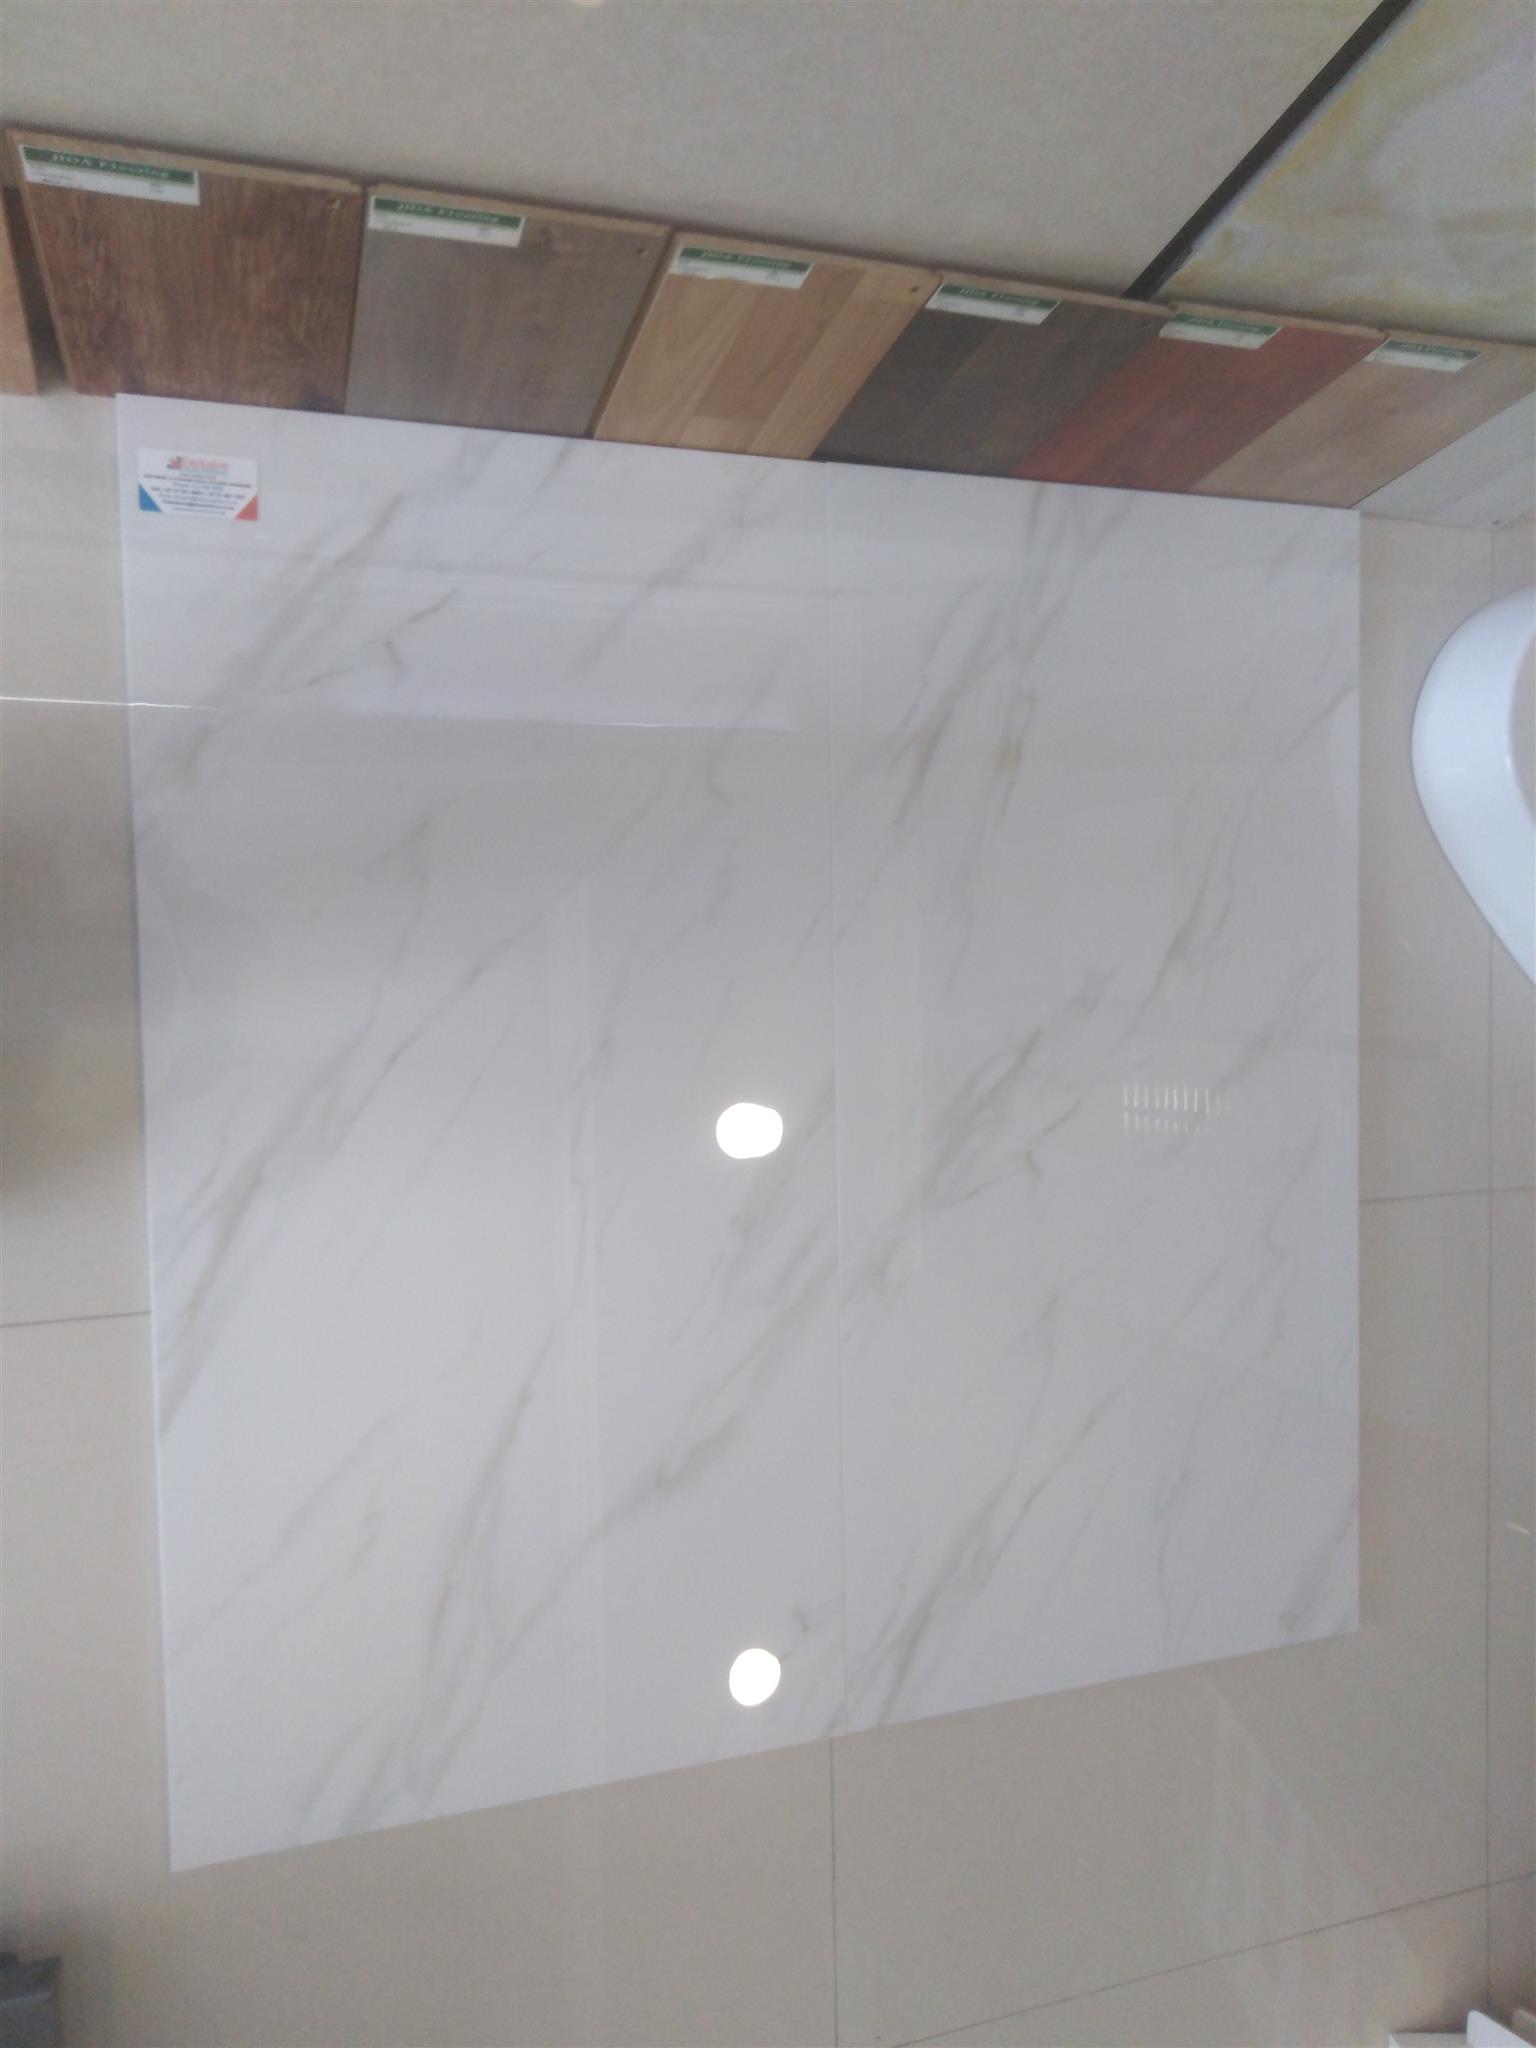 Polished Porcelain Tiles 800x800 And 600x1200 On Sale Junk Mail